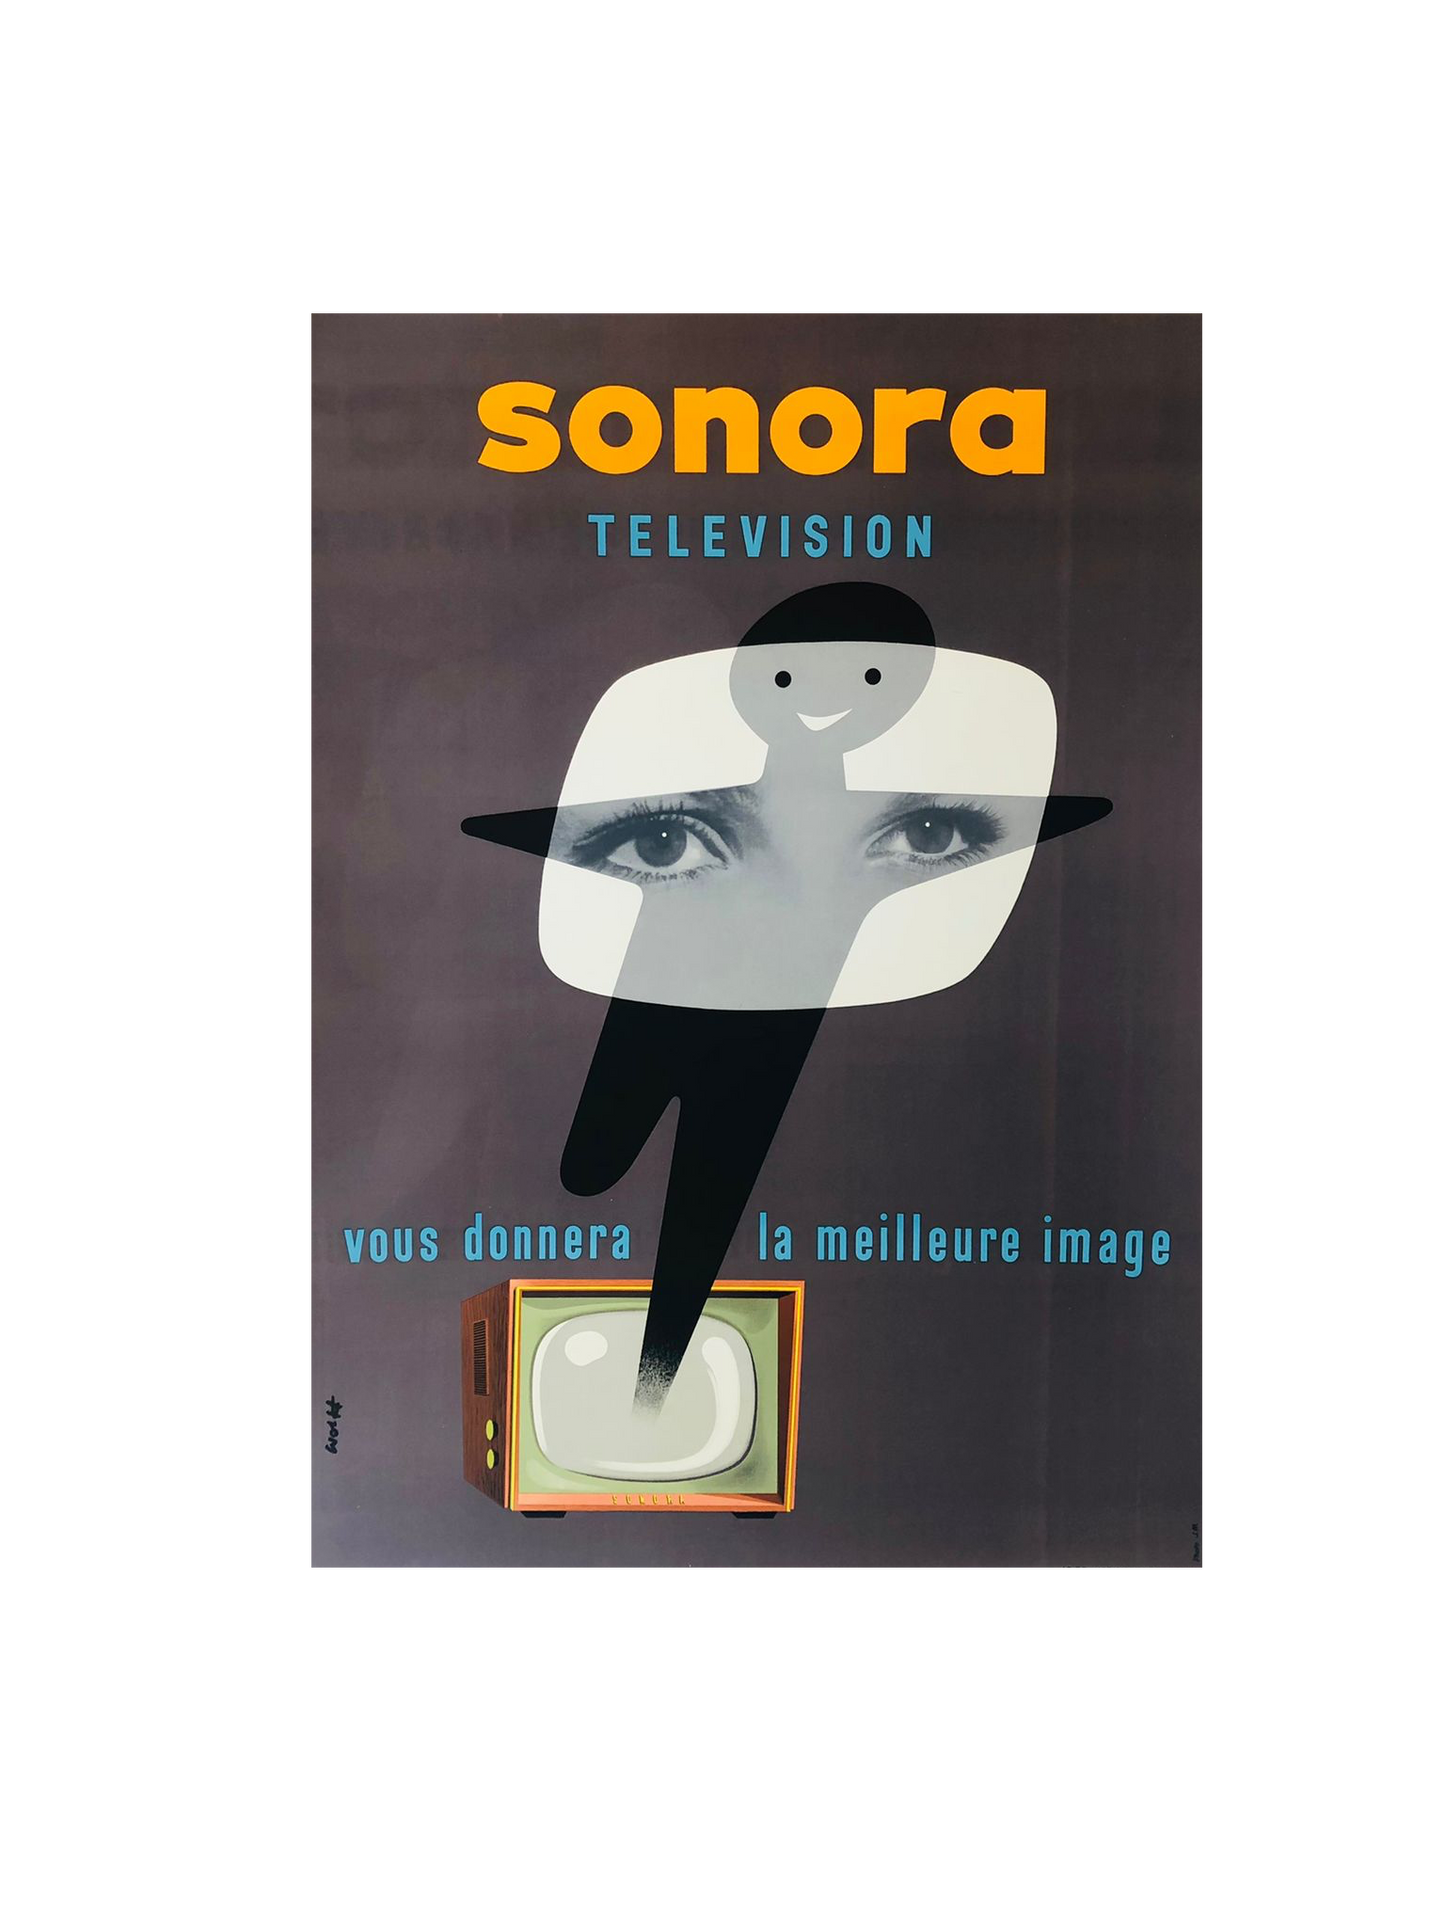 Sonora Televisions by Marcel Wolff